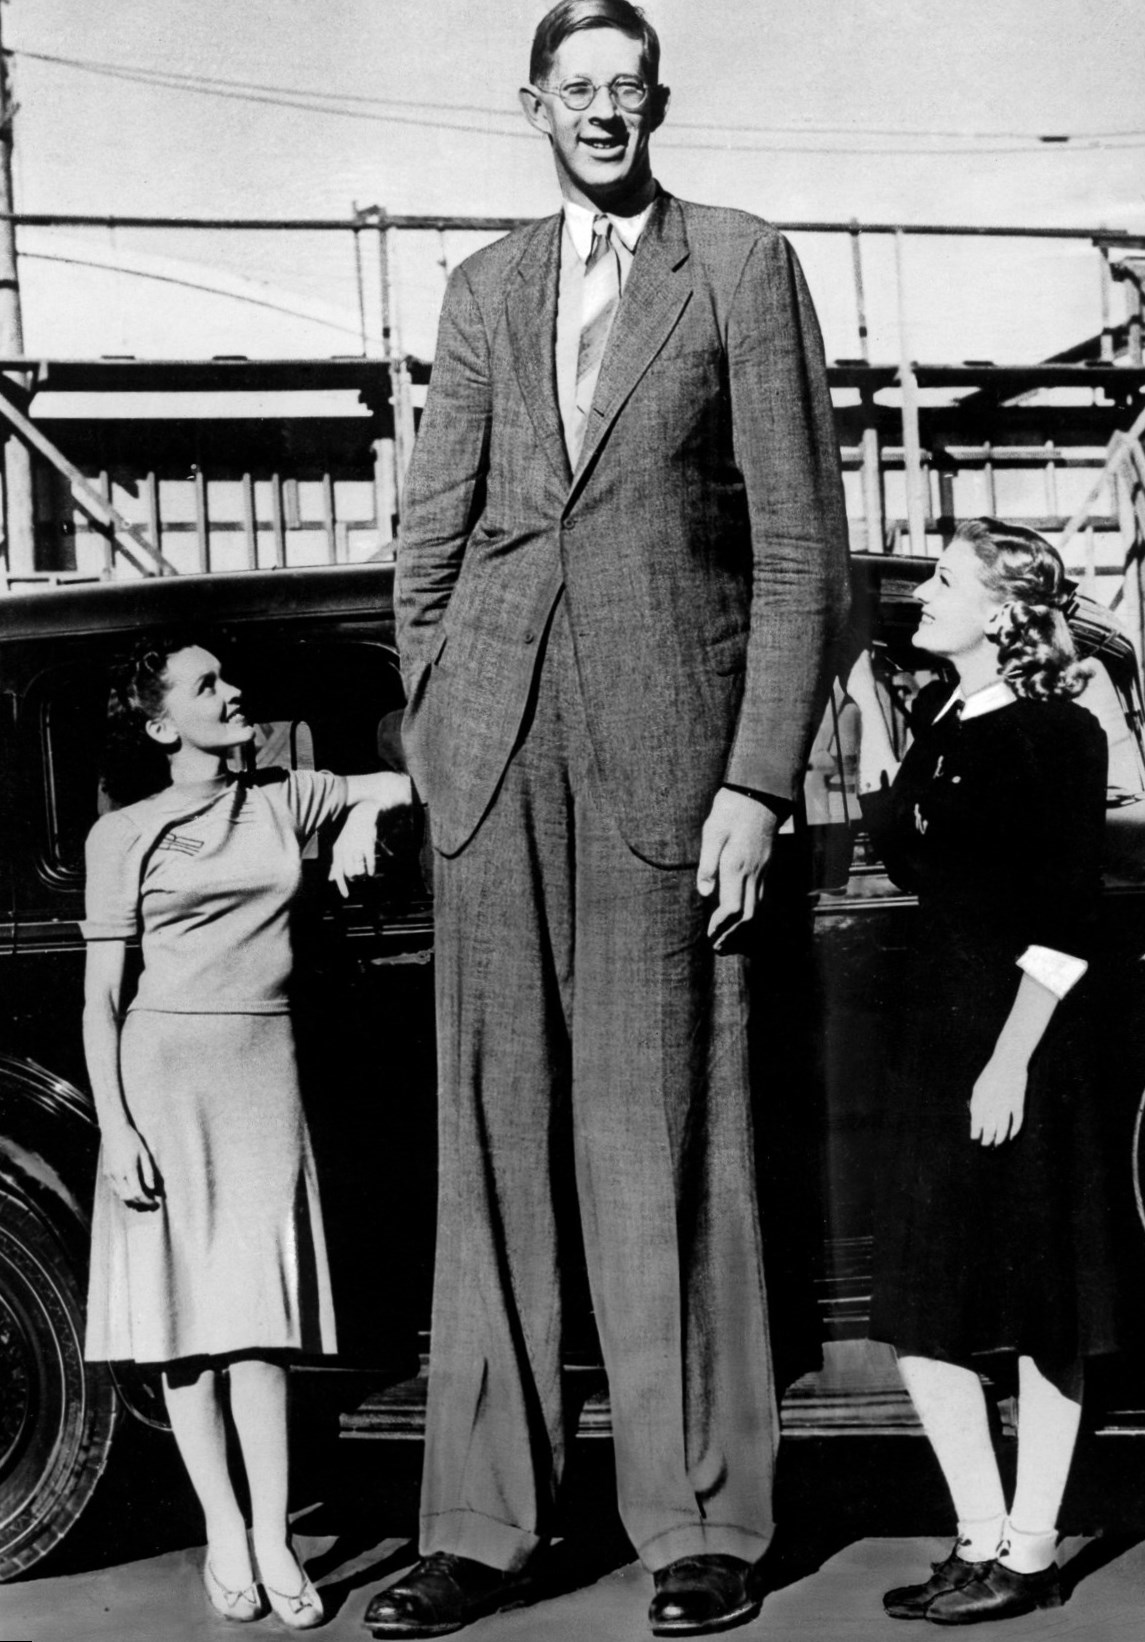 Robert Wadlow weight, height and age. Body measurements!